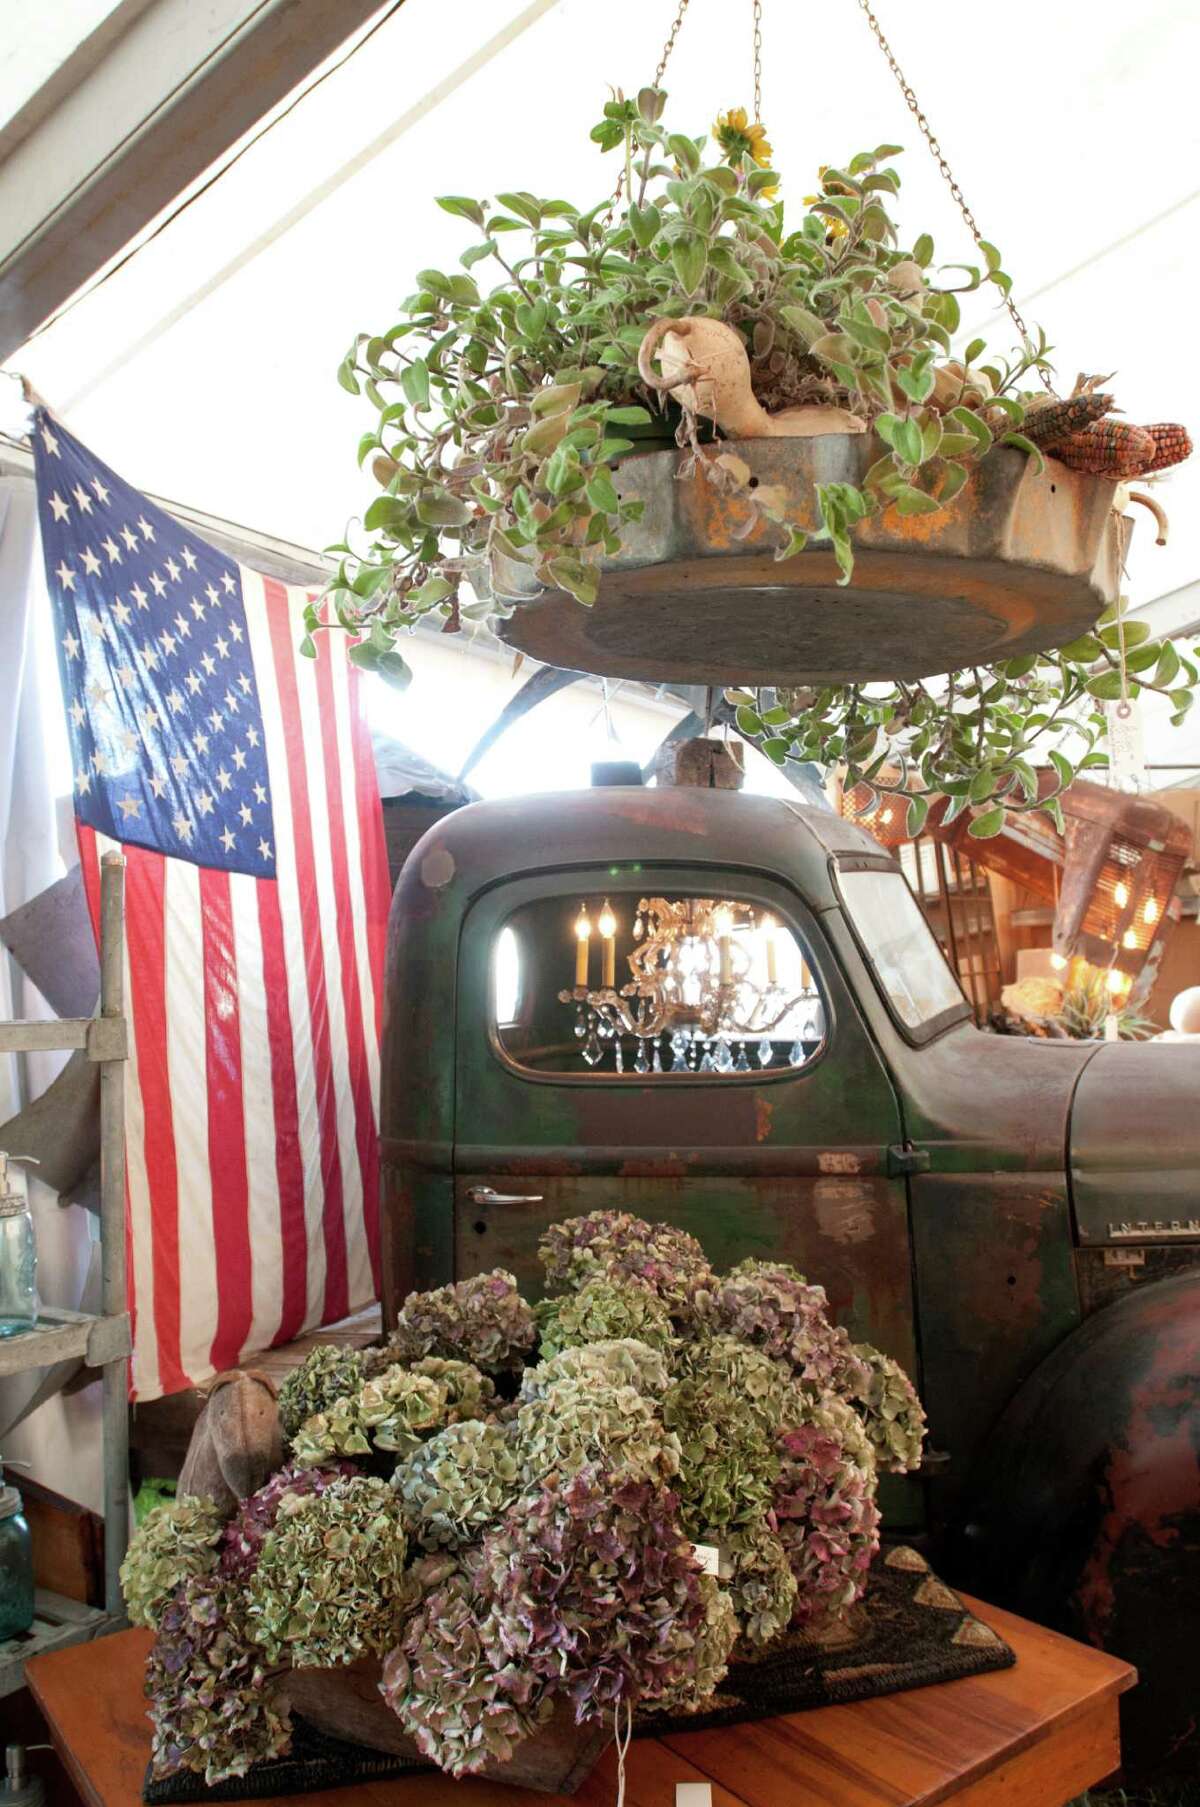 Marburger Farm Antique Show's 43-acre field hosts more than 350 dealers in 10 large large tents and 12 historic buildings. Its spring show opens Tuesday and runs through April 4.